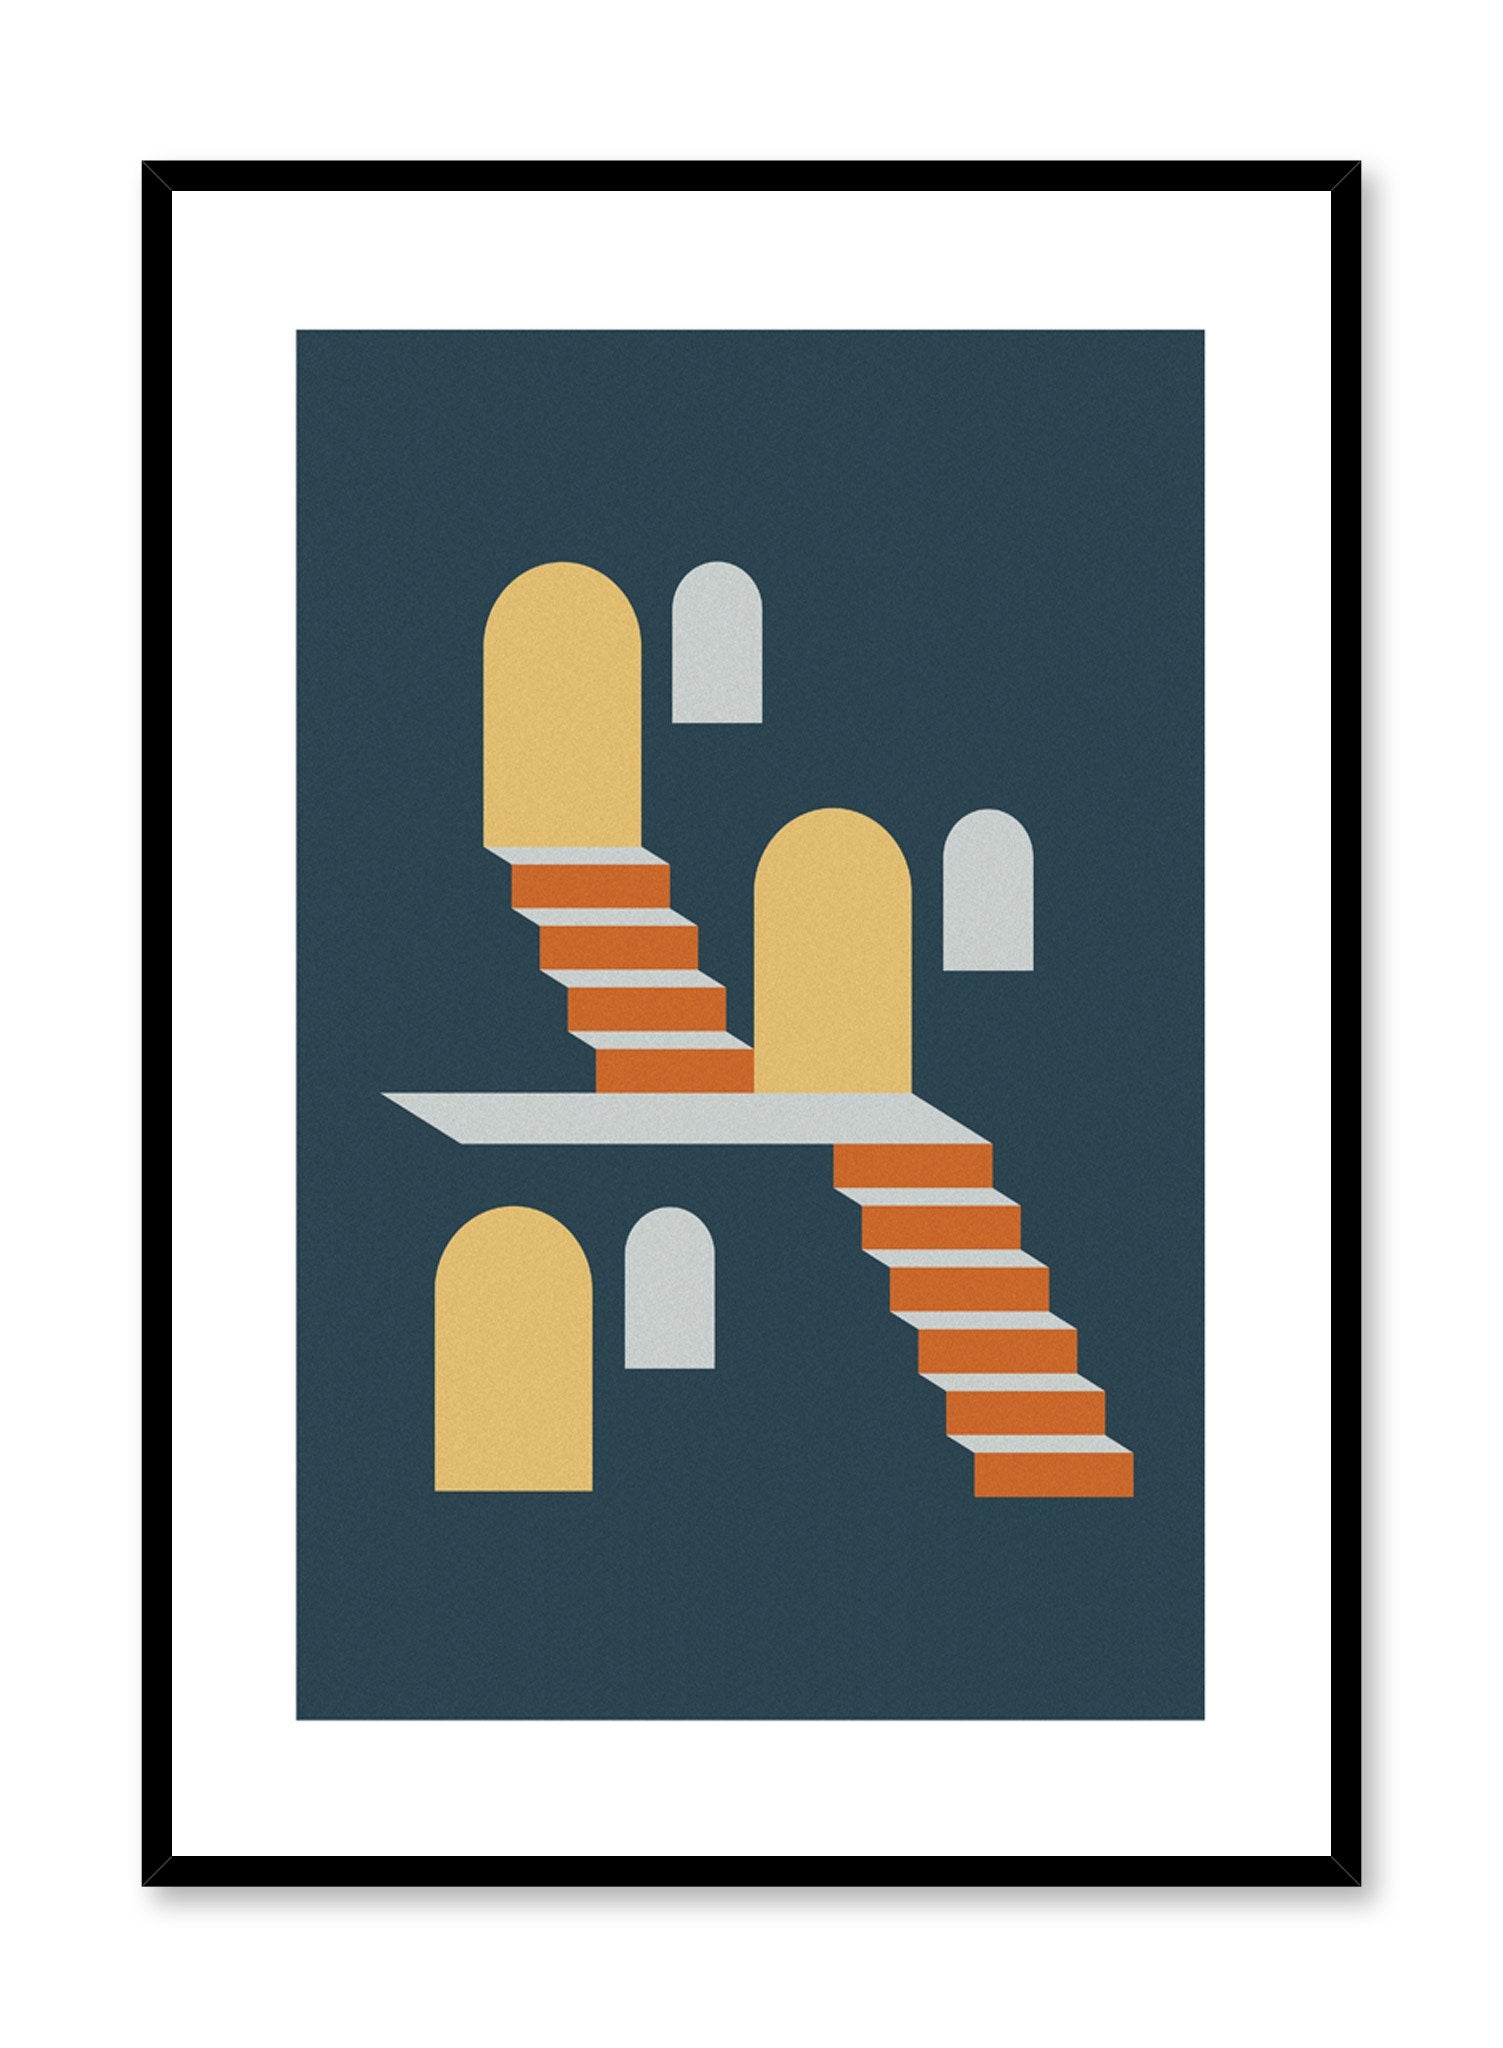 Minimalist design poster by Opposite Wall with Two Flights abstract graphic design